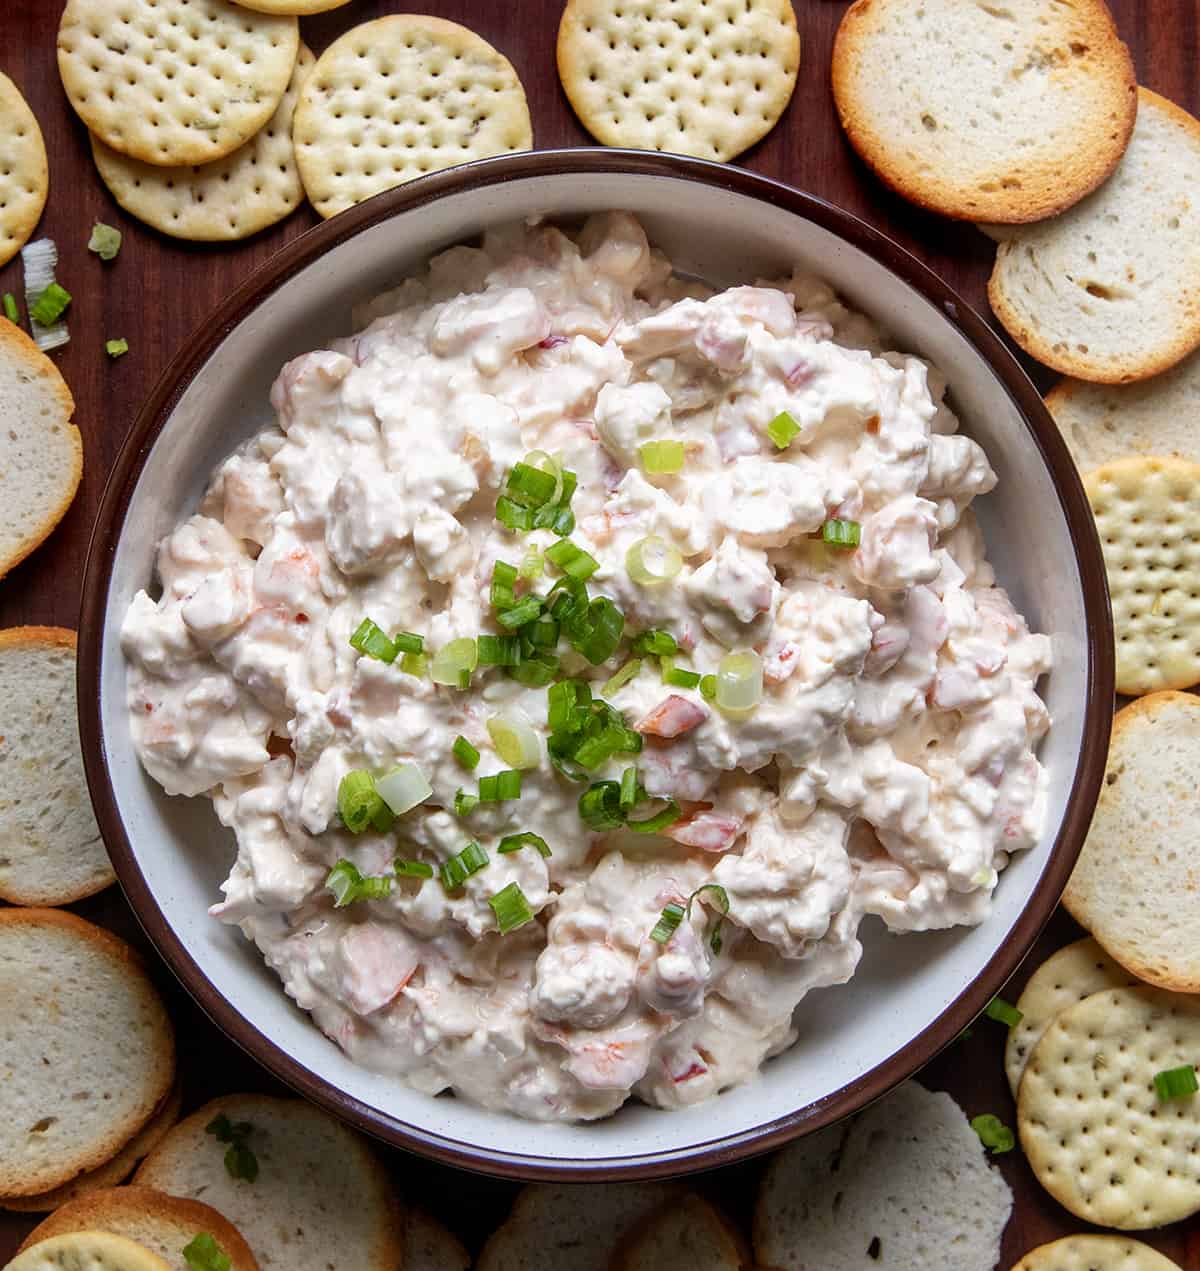 Overhead Image of Shrimp Dip in a Bowl Surrounded by Bagel Chips and Crackers.